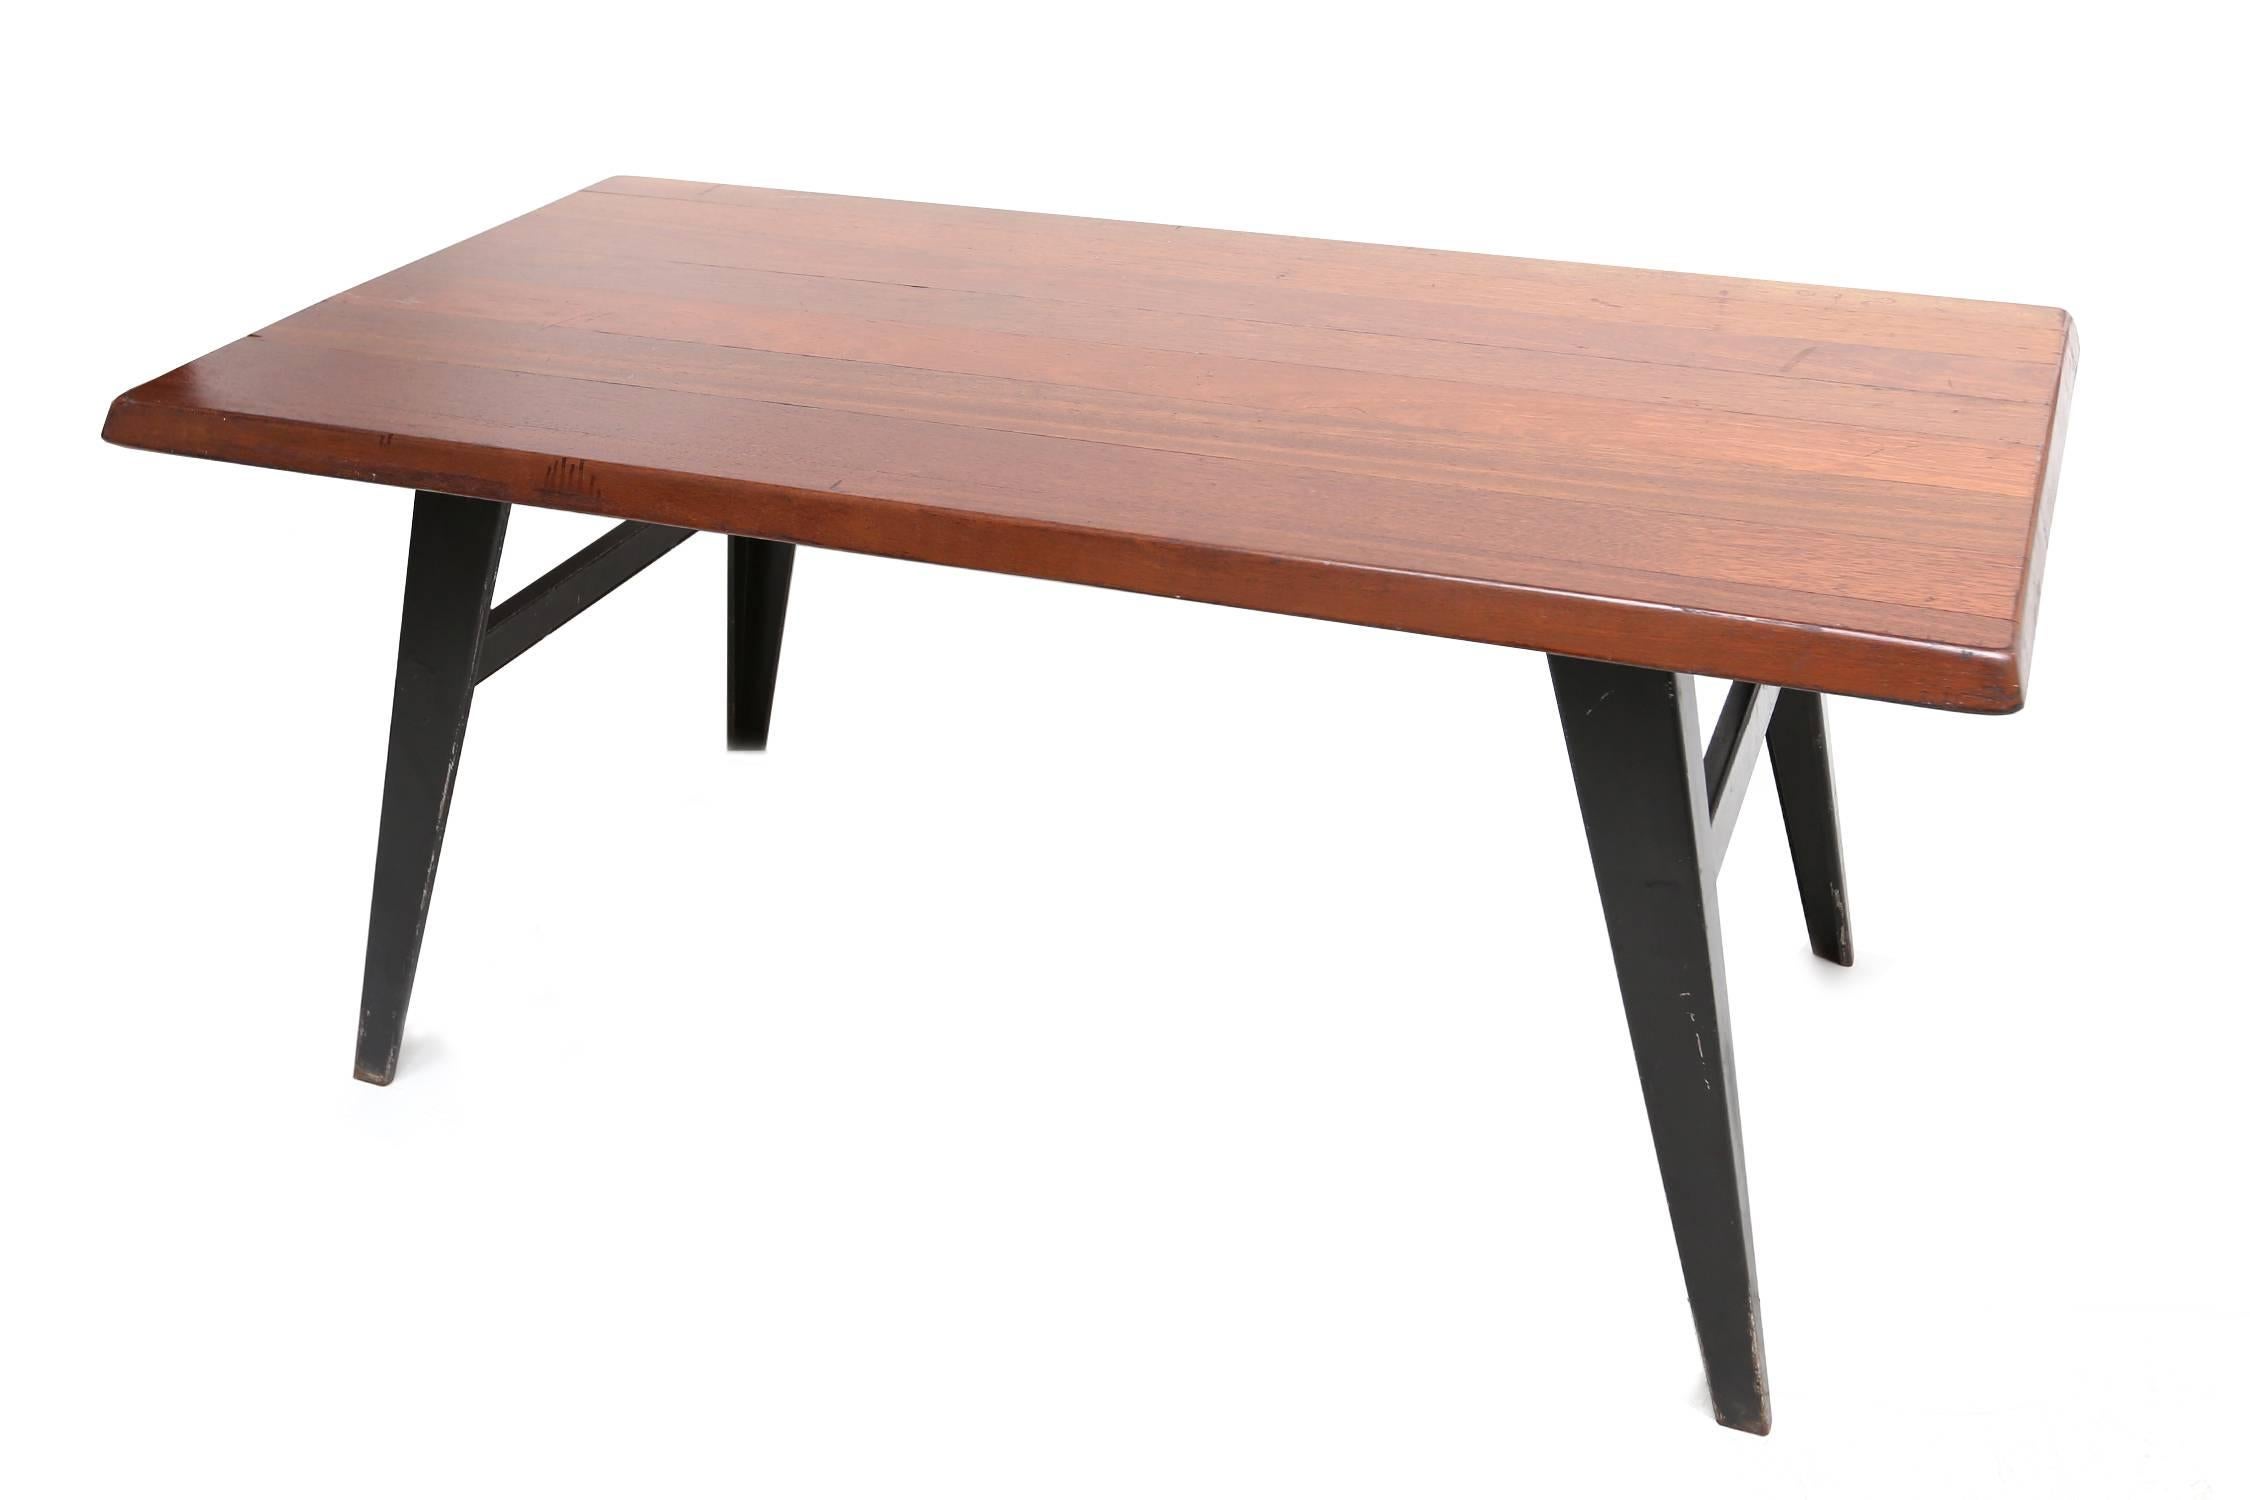 Industrial dining table in the style of jean prouvé
Solid wooden top in french elm on black lacquered metal base,
France, 1950s.
this work is anonymous, but reminds strongly of the great french designs of the early 20th century. Who knows ..